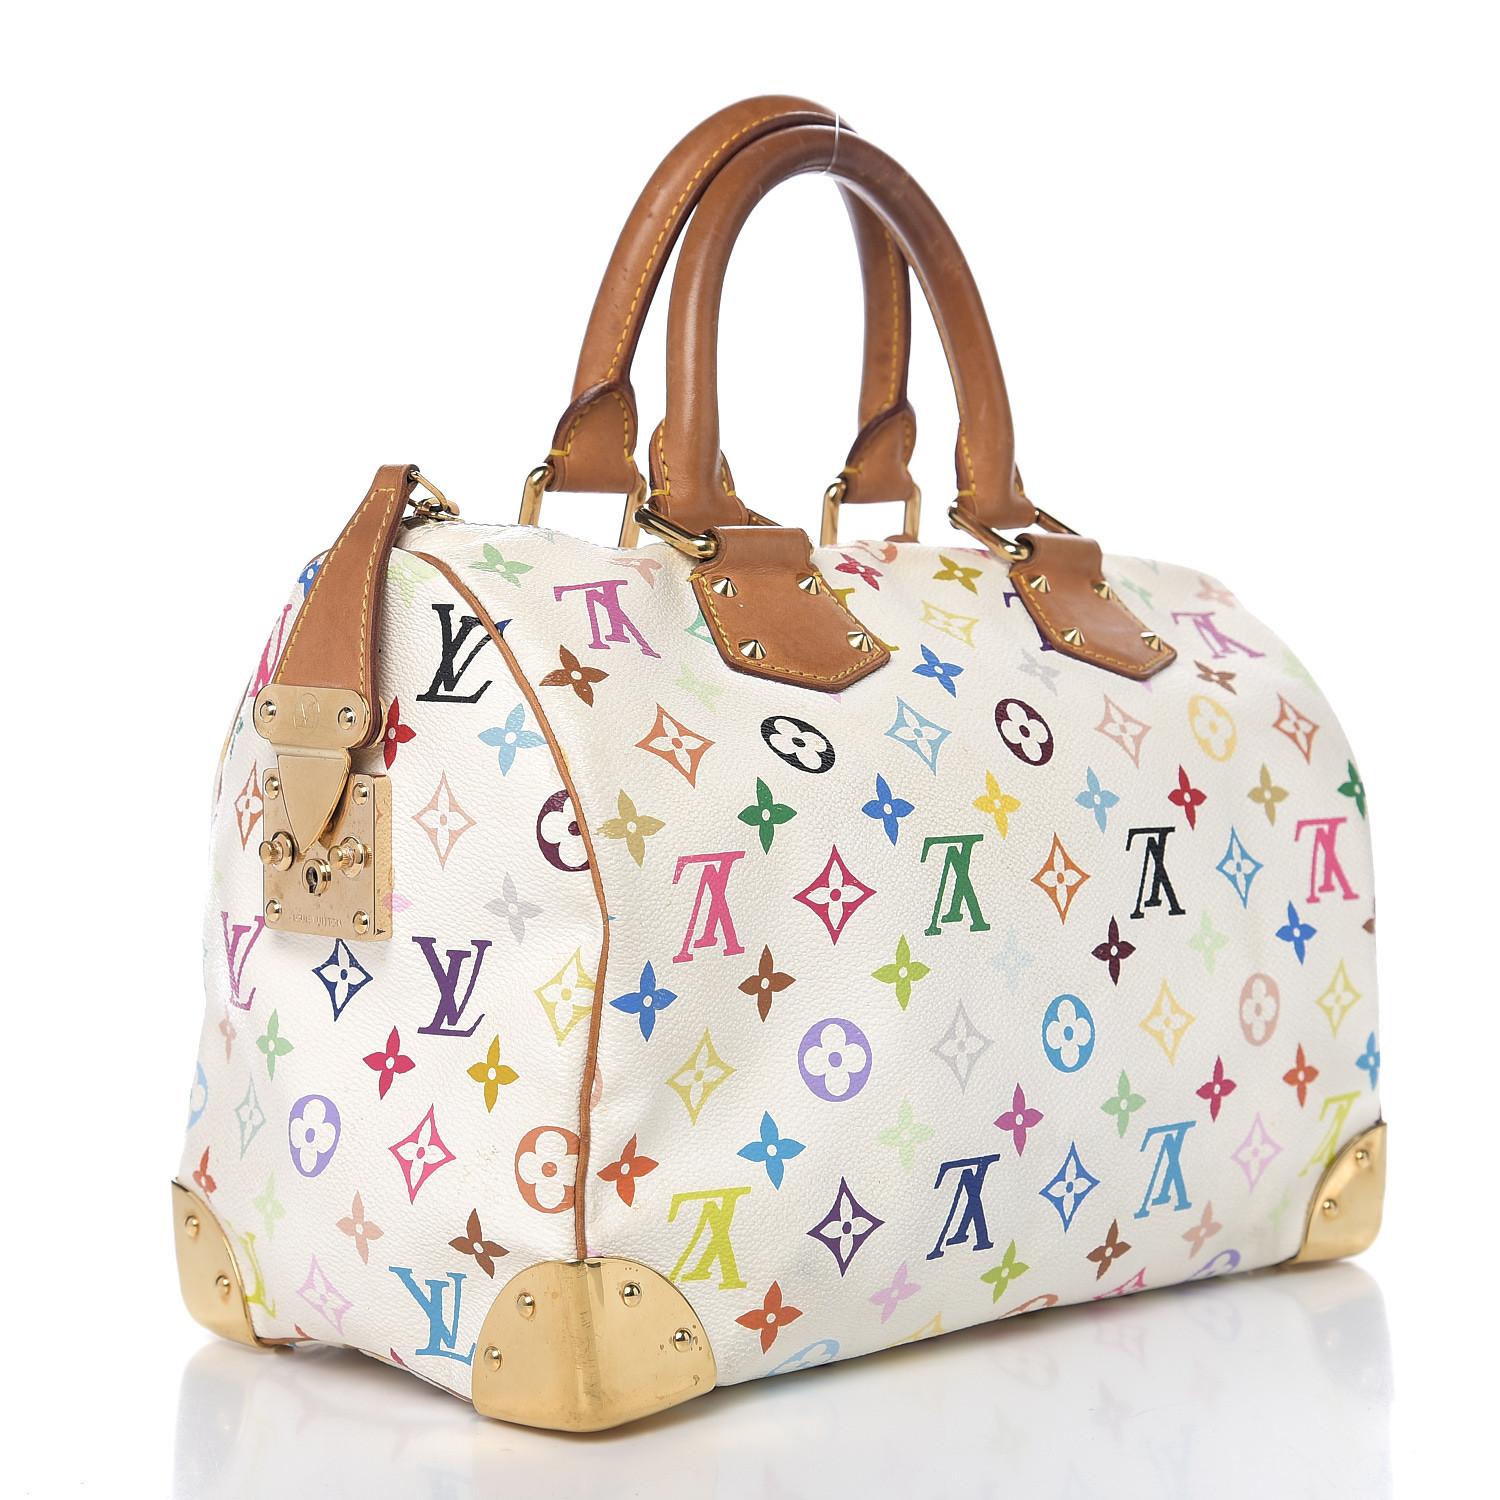 This classic tote bag is crafted of Multicolor Louis Vuitton monogram canvas in 33 vibrant colors on white coated canvas. This handbag features vachetta cowhide leather piping, sturdy rolled leather top handles, an external flap pocket on the front